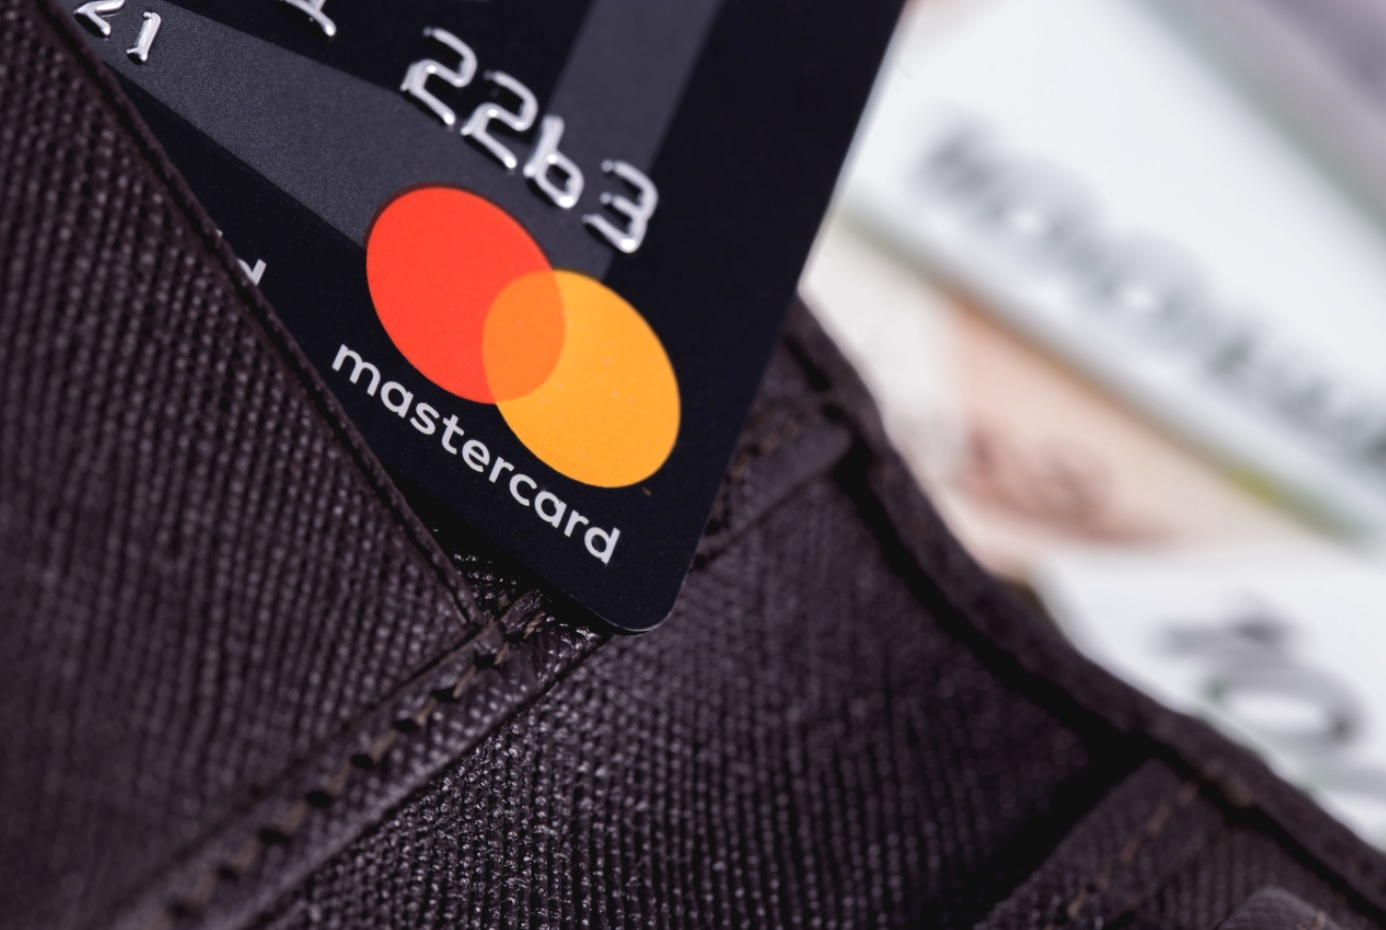 Weekly Report: Bison bank wins crypto license, Nexo and MasterCard to launch a crypto-payments card